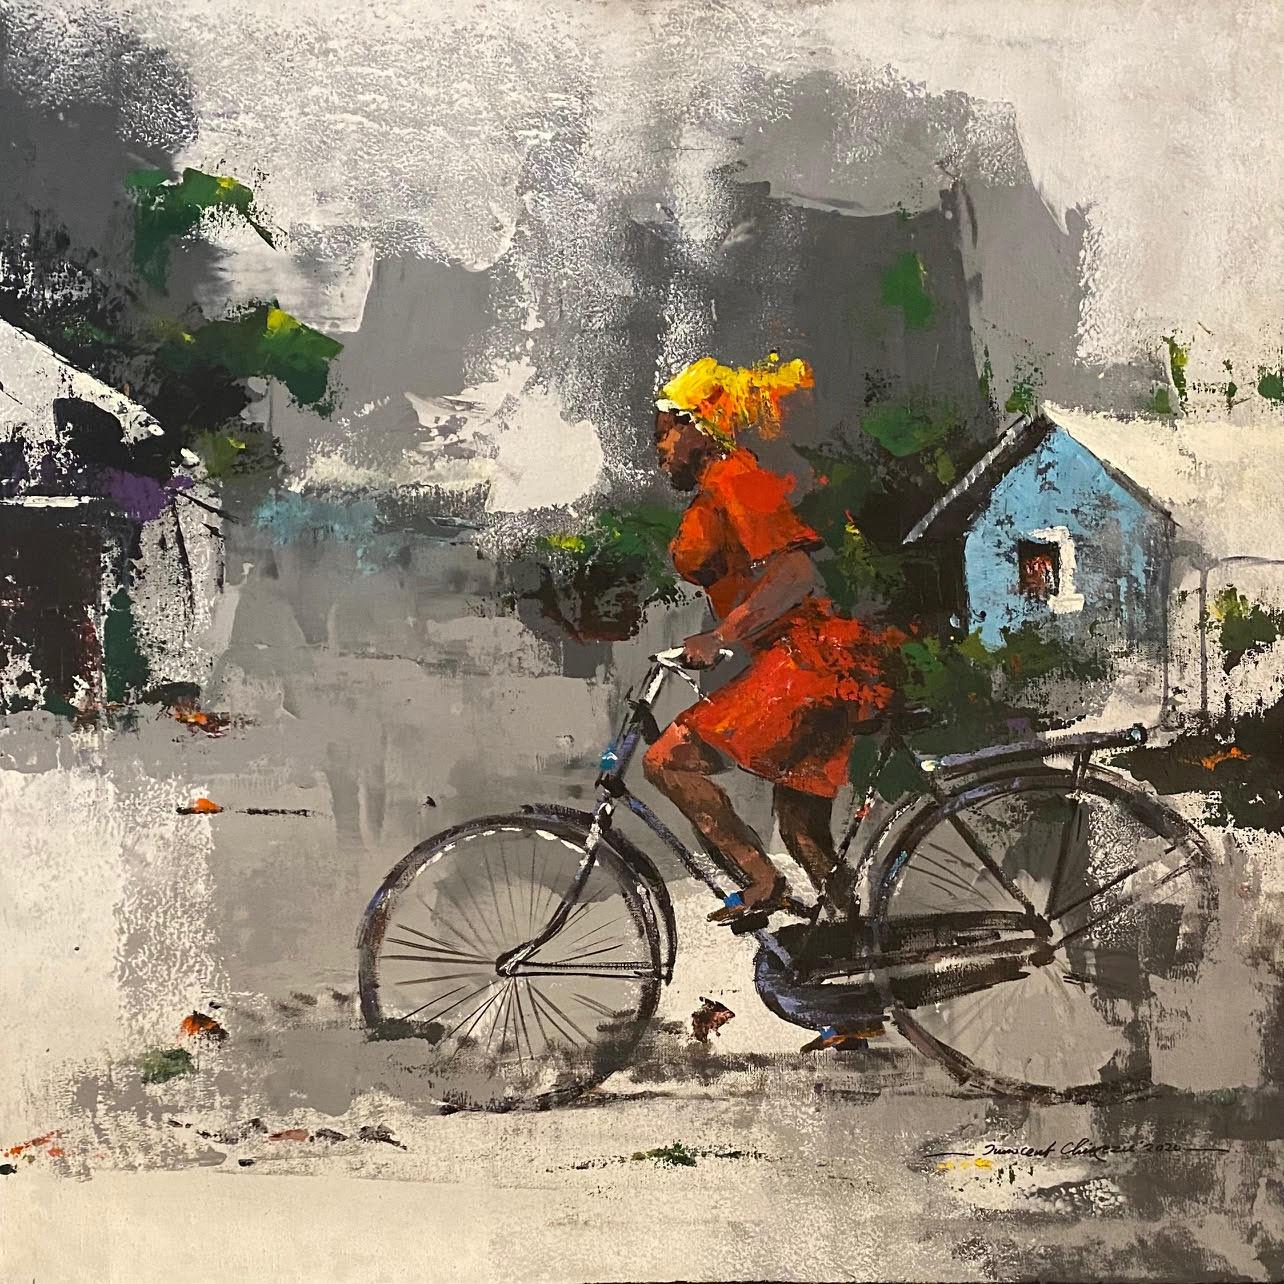 Innocent Chikezie Figurative Painting - ‘A Woman Riding The Bike’  Original Figurative Mixed Media 32" x 35" by I.C